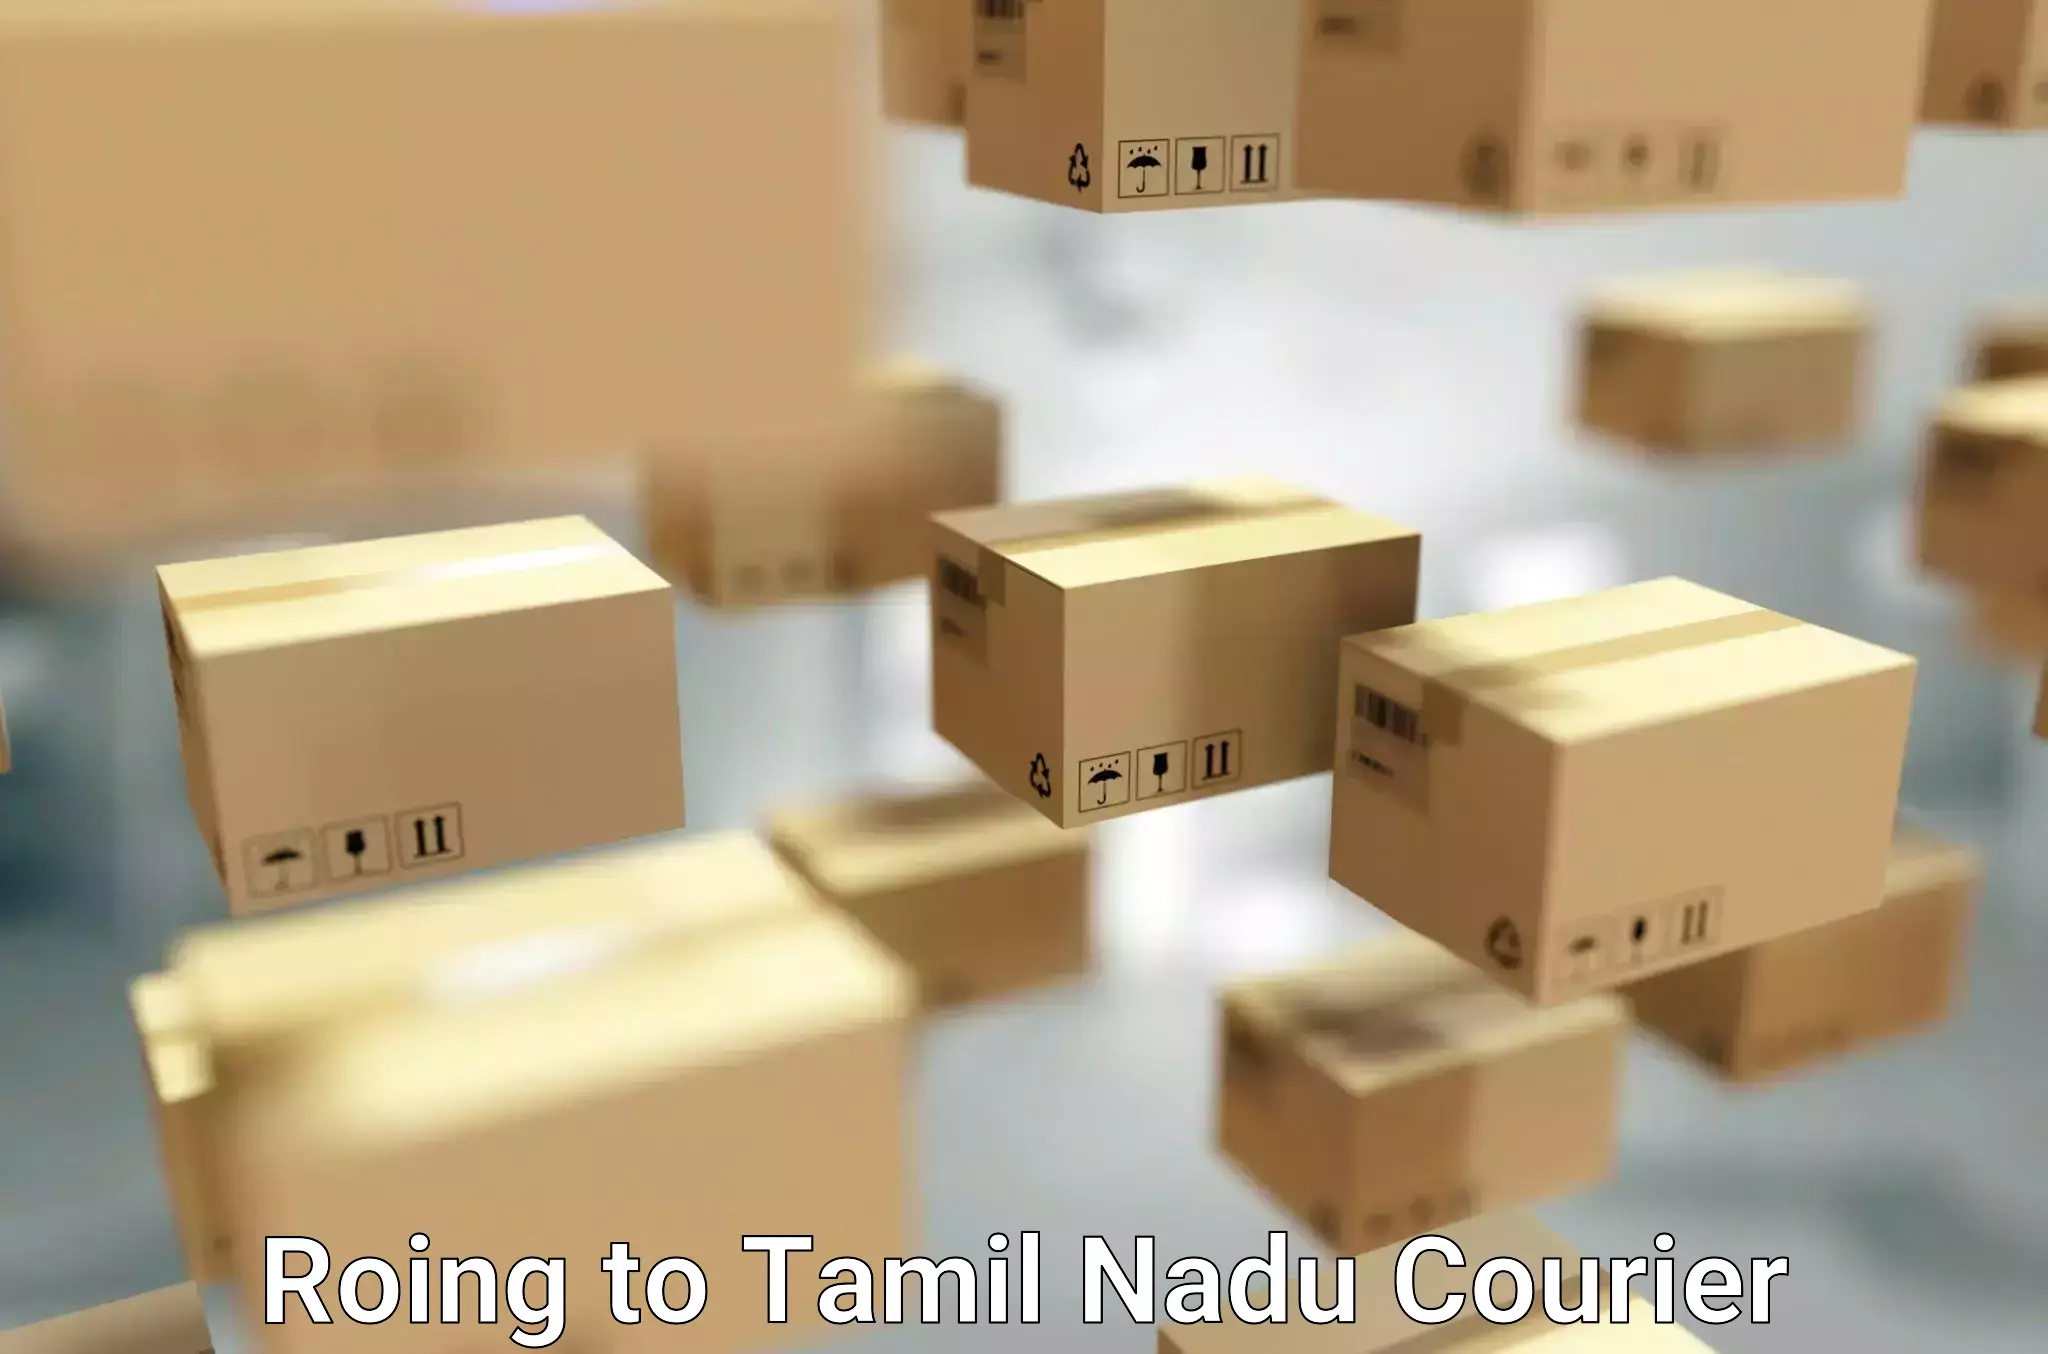 Stress-free household moving Roing to Tamil Nadu